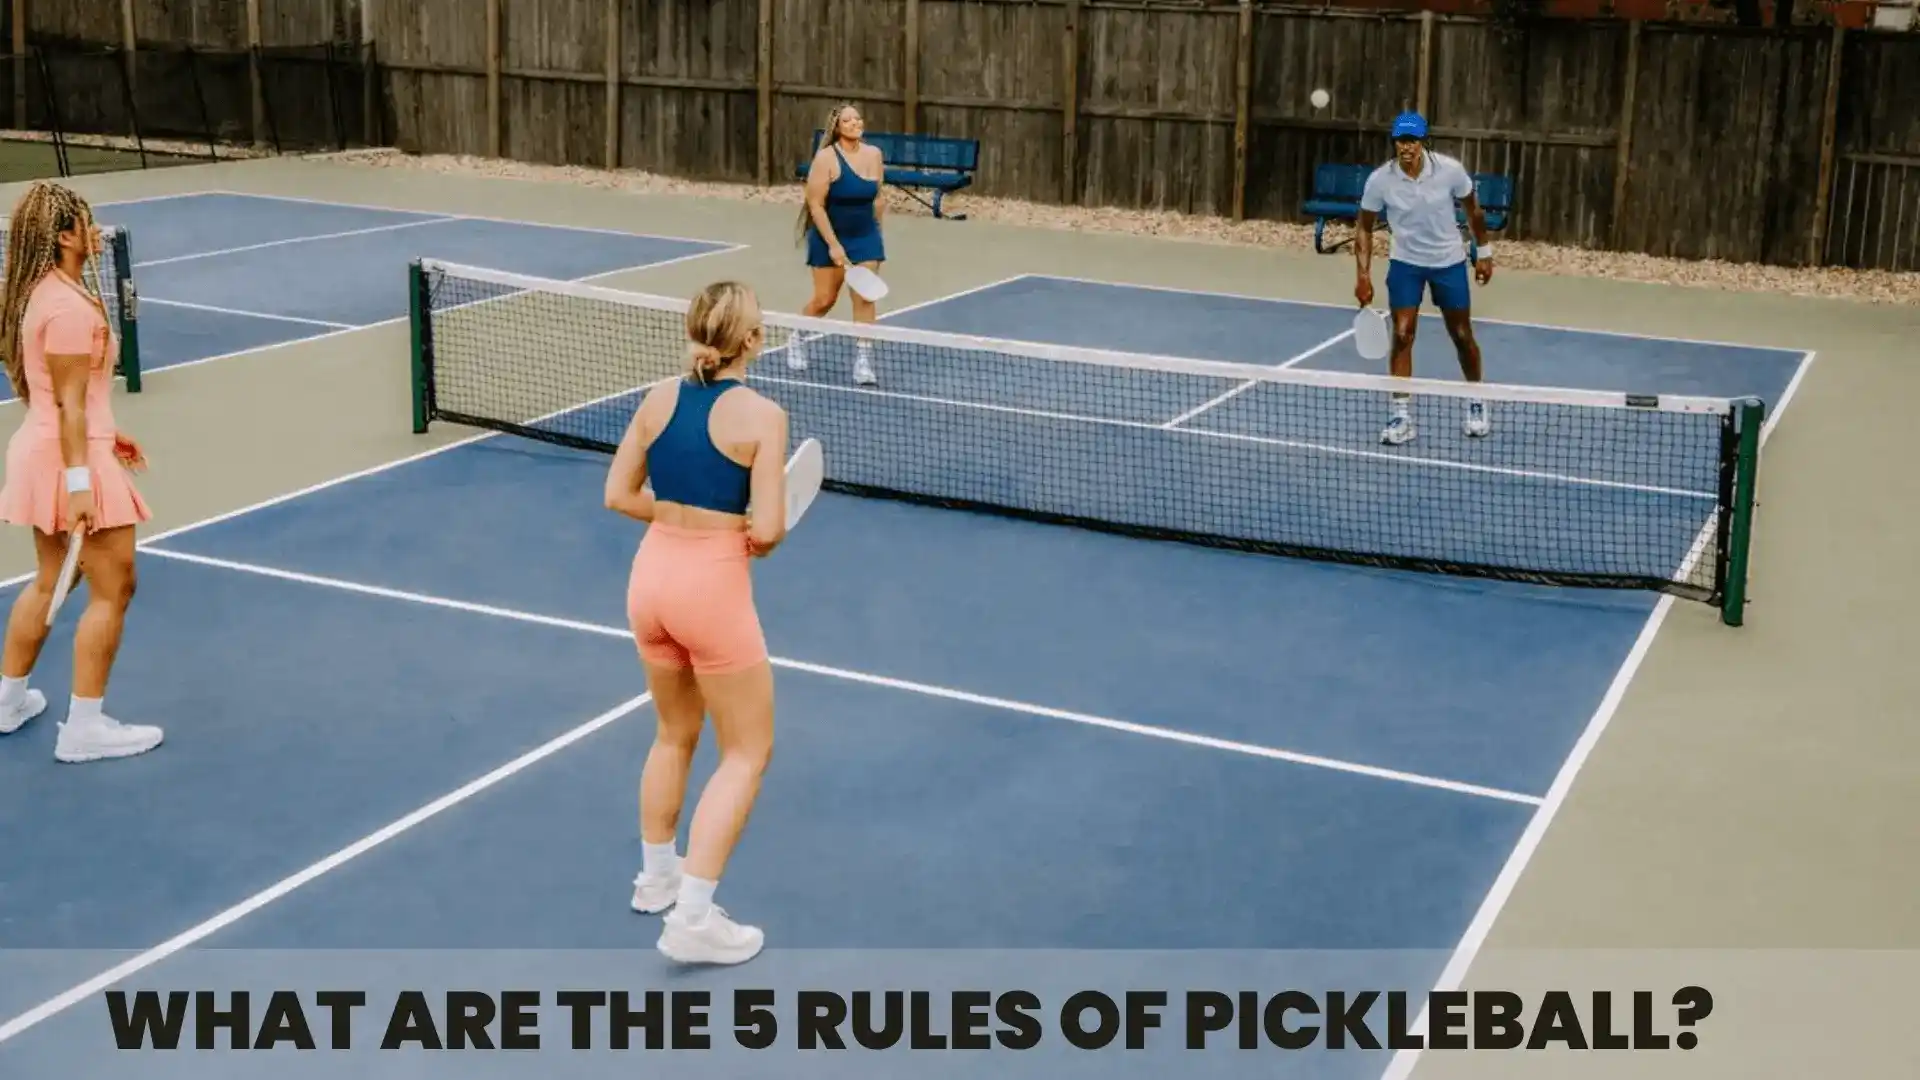 What Are The 5 Rules Of Pickleball?